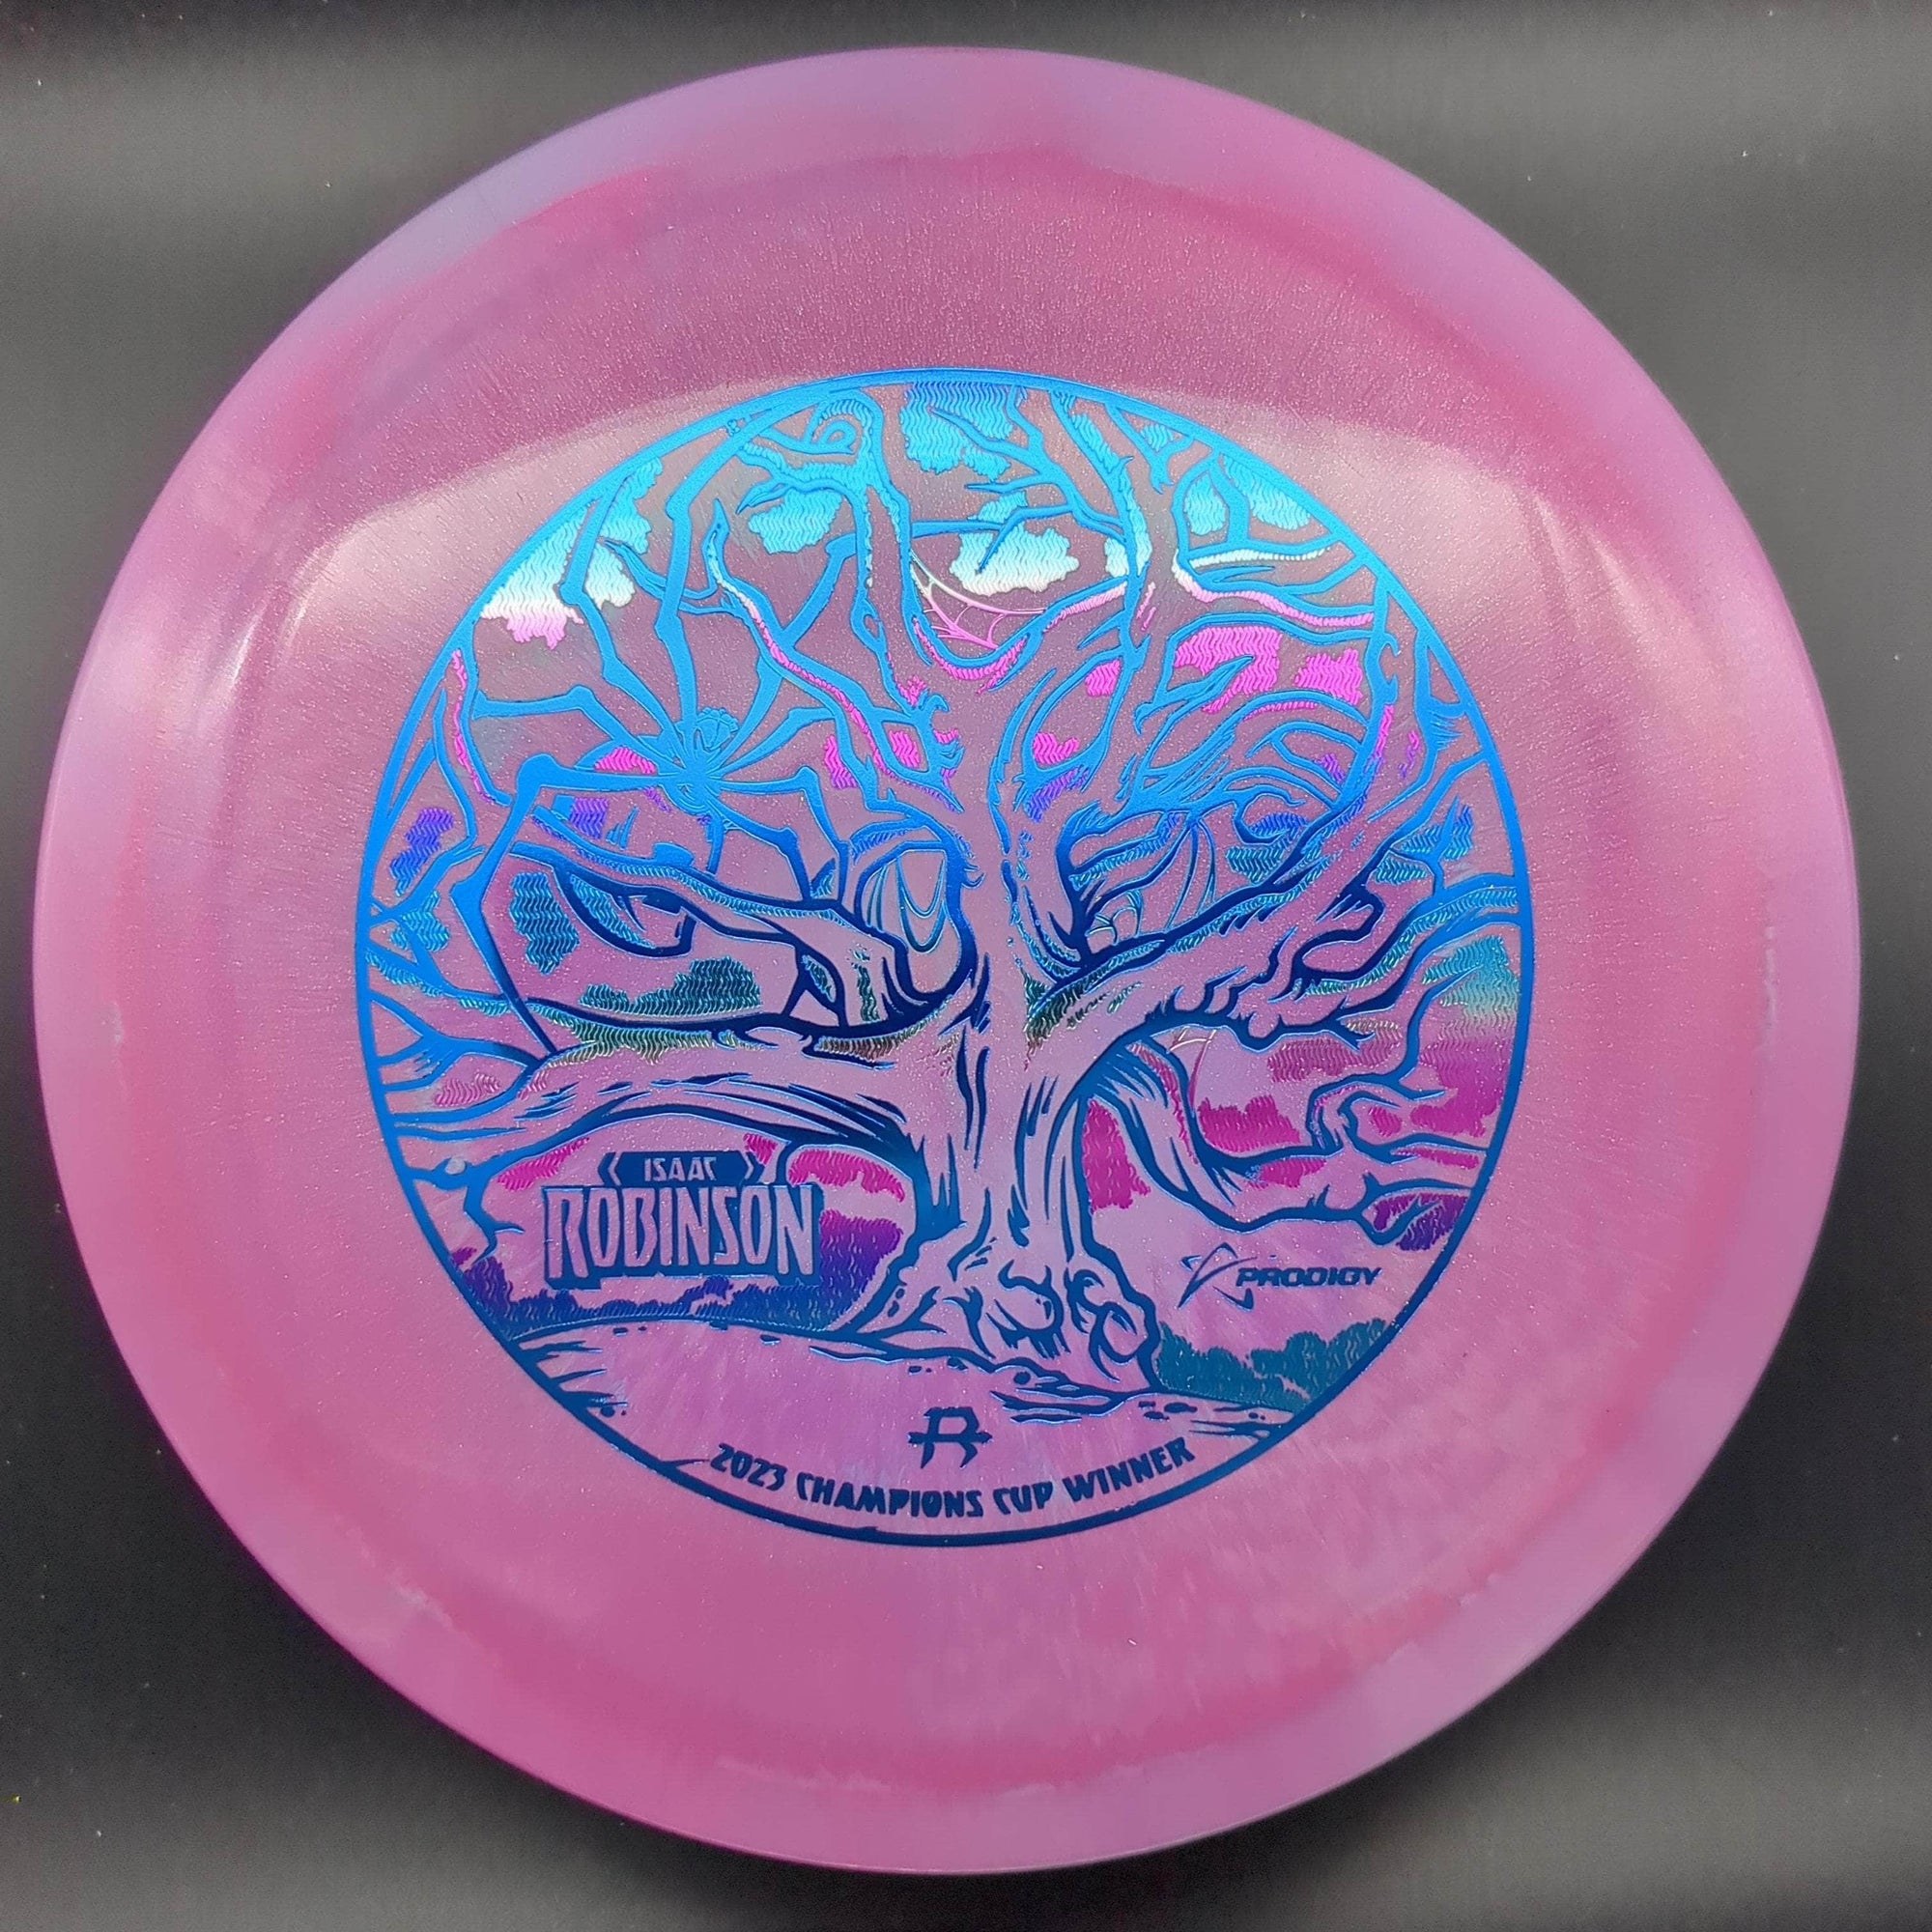 Prodigy Fairway Driver Pink Blue Sunset Stamp 173g F3, 500 Spectrum Glimmer Plastic, Isaac Robinson "Weaver" Stamp